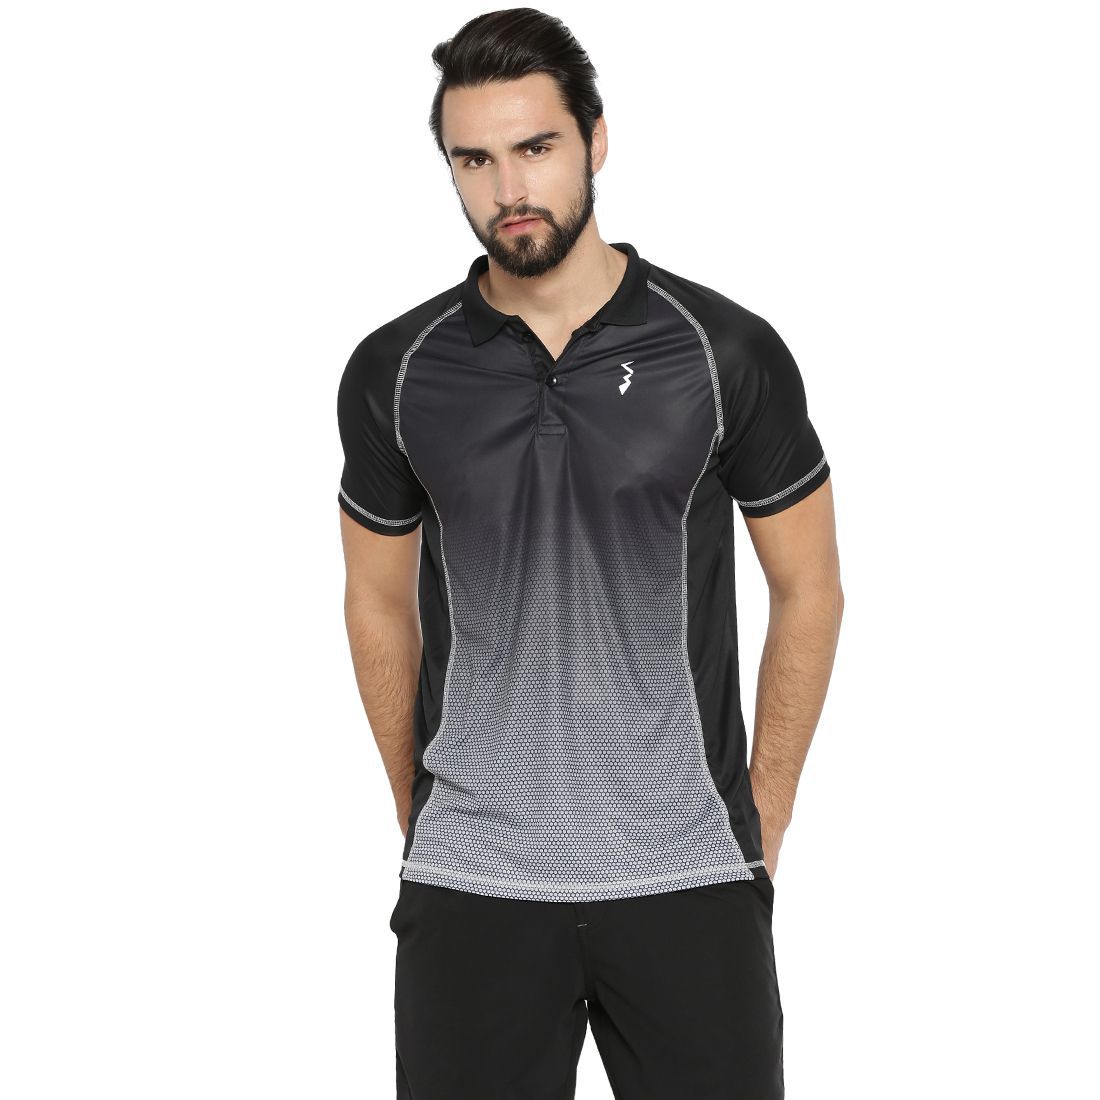     			Campus Sutra Black Polyester Polo T-Shirt Single Pack